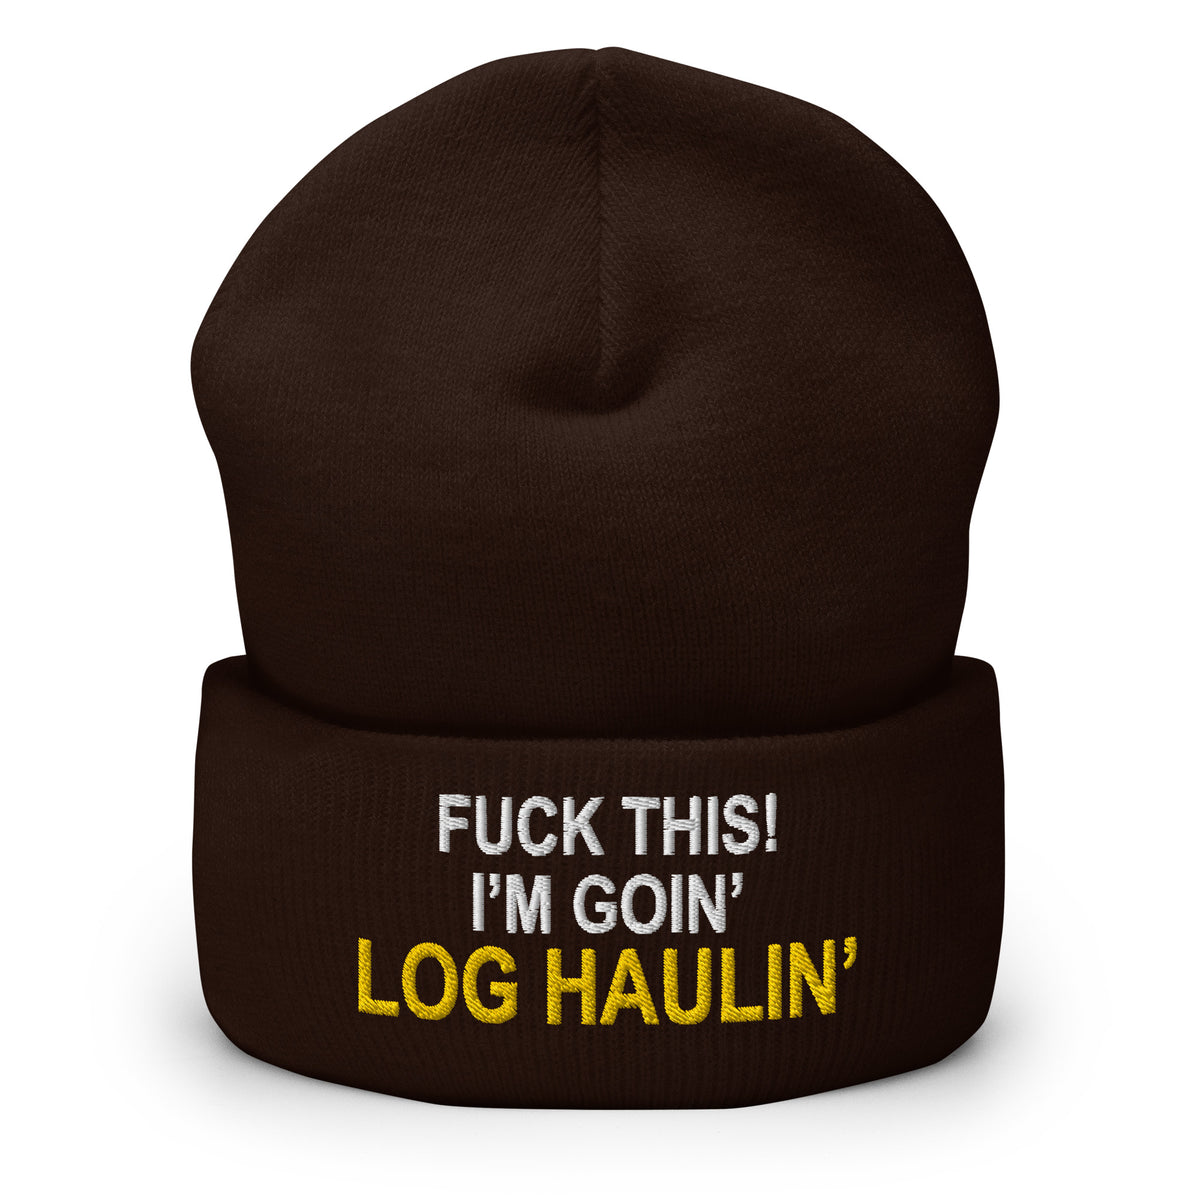 Fuck This! I'm Goin' Log Haulin' - Embroidered Cuffed Beanie - Free Shipping